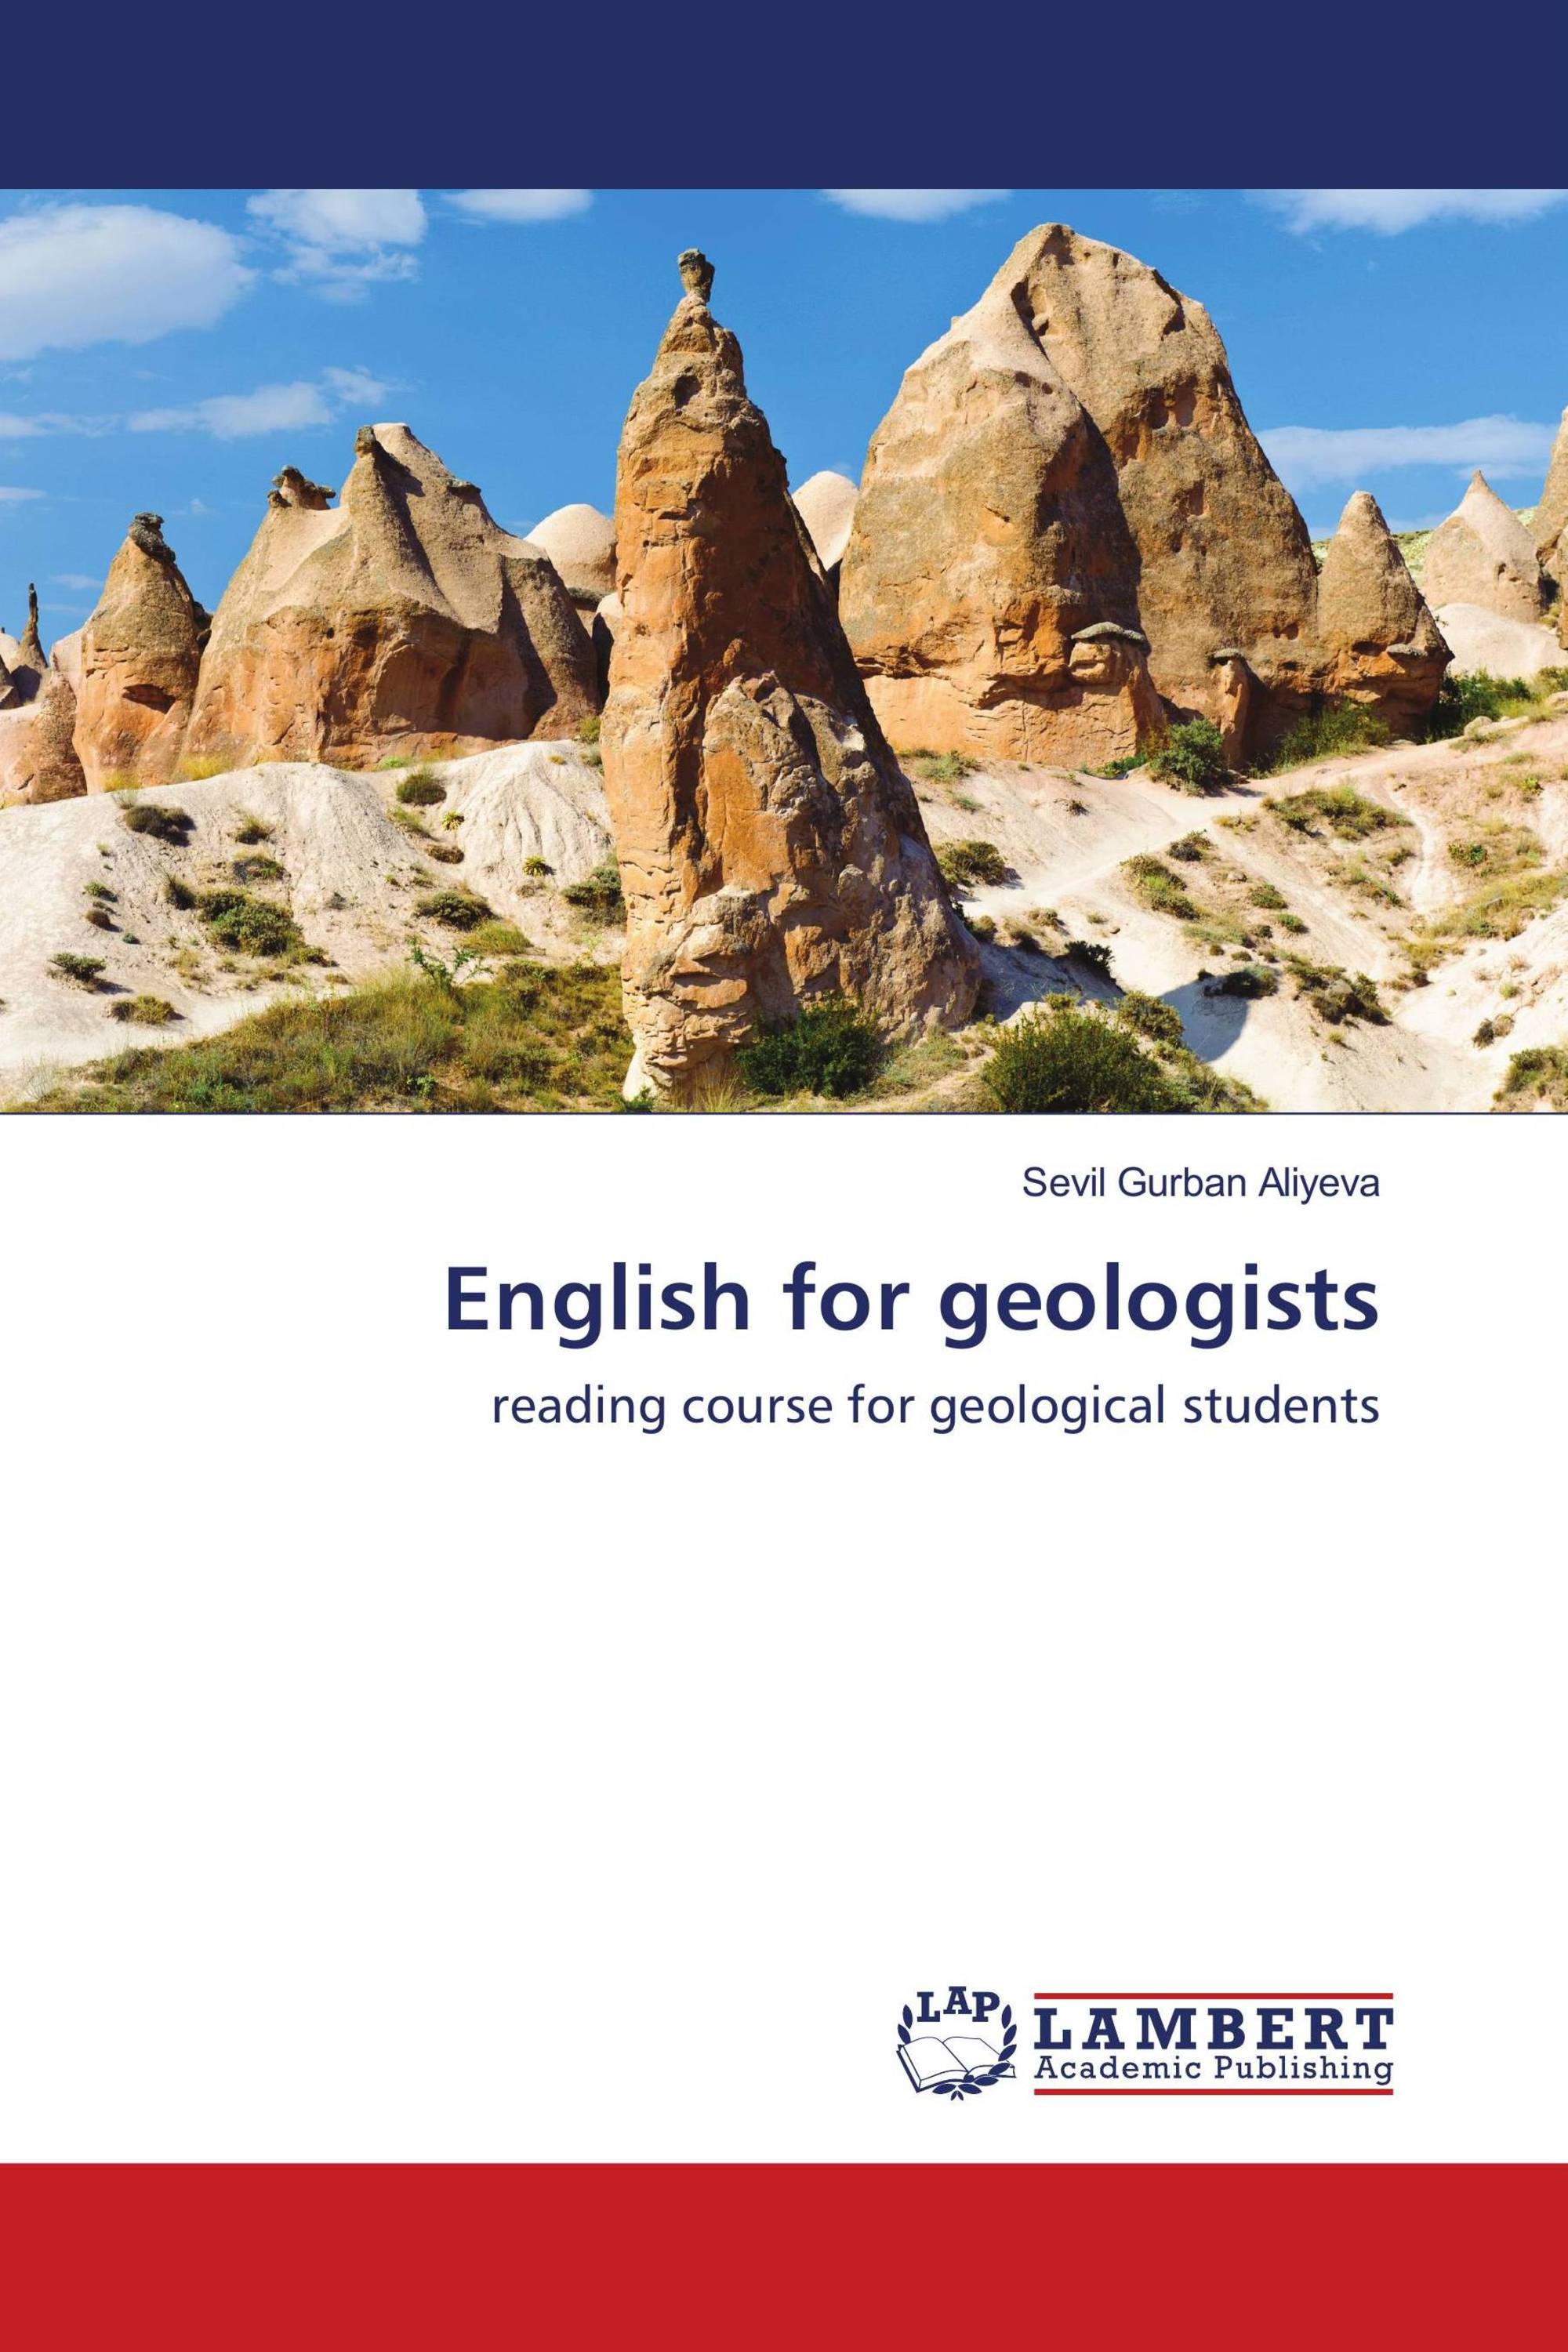 English for geologists